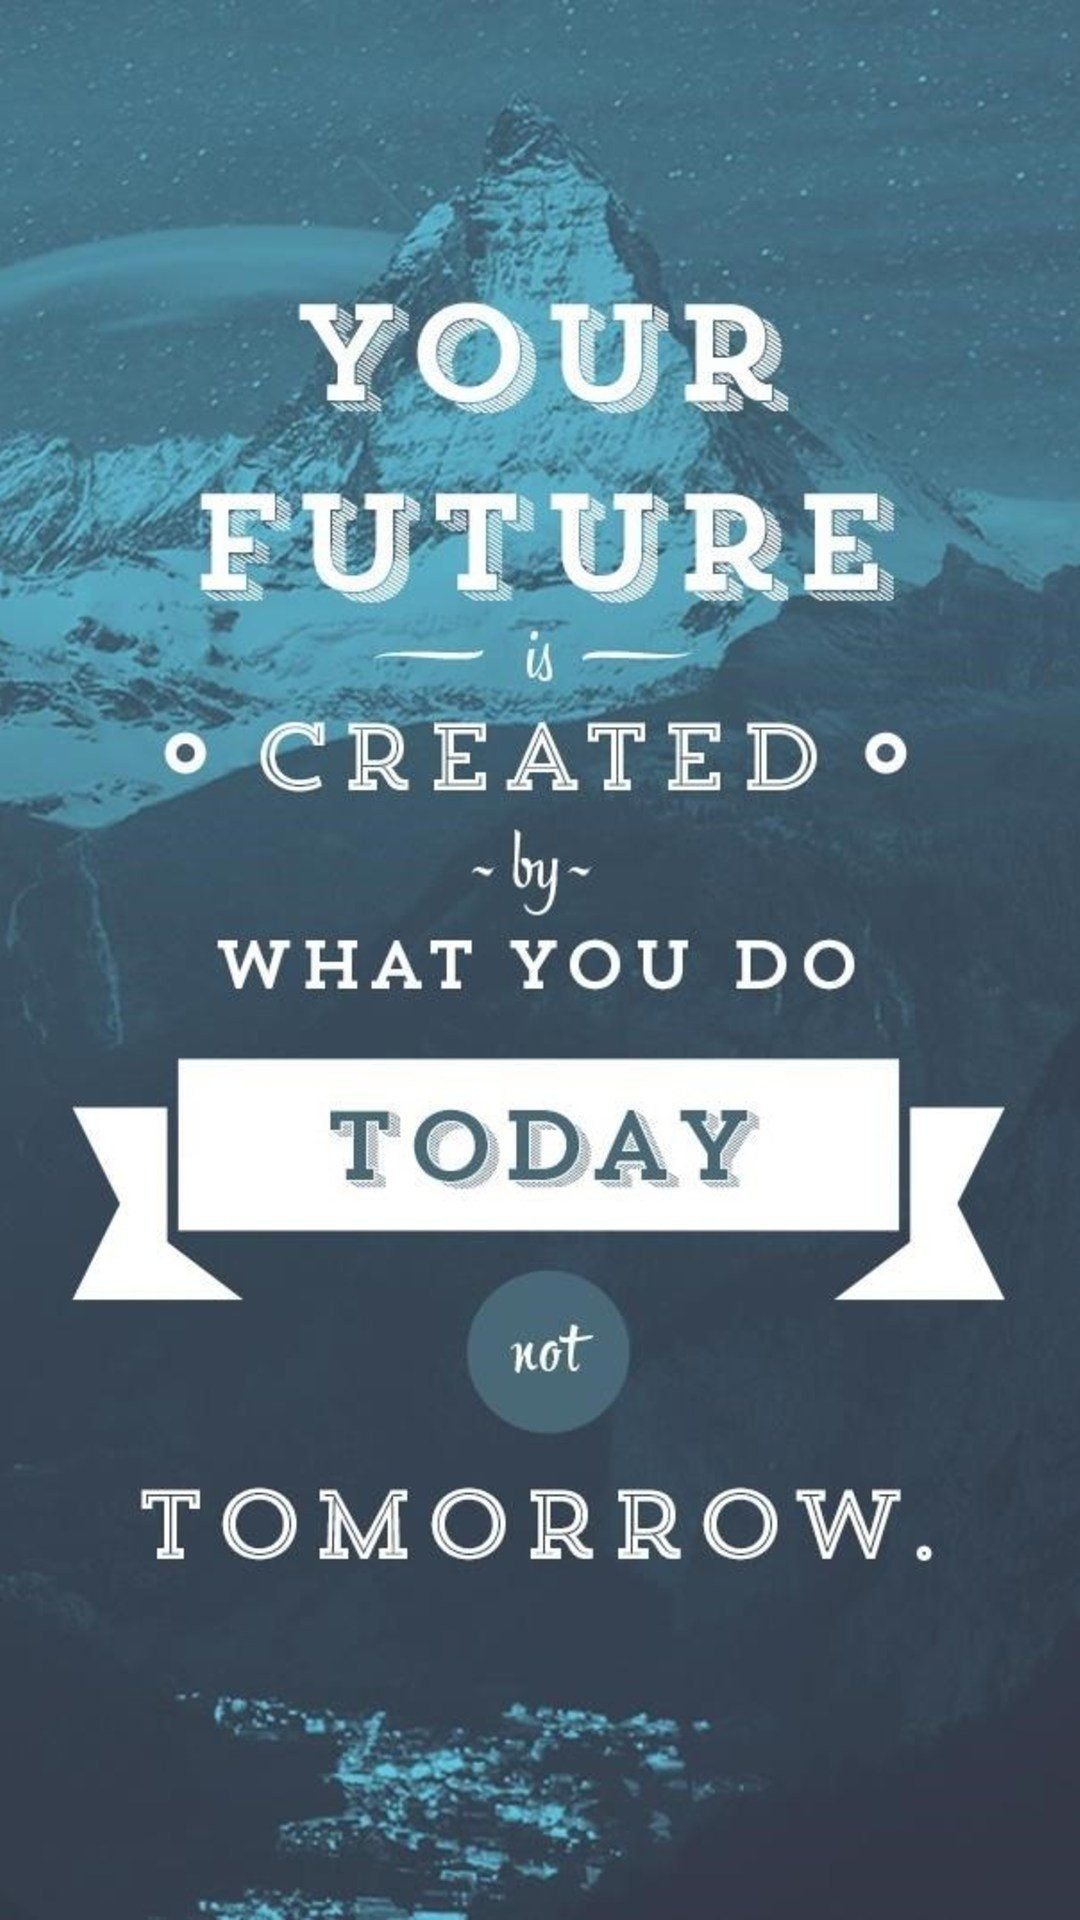 Your Future Is Created Today Not Tomorrow - Motivational